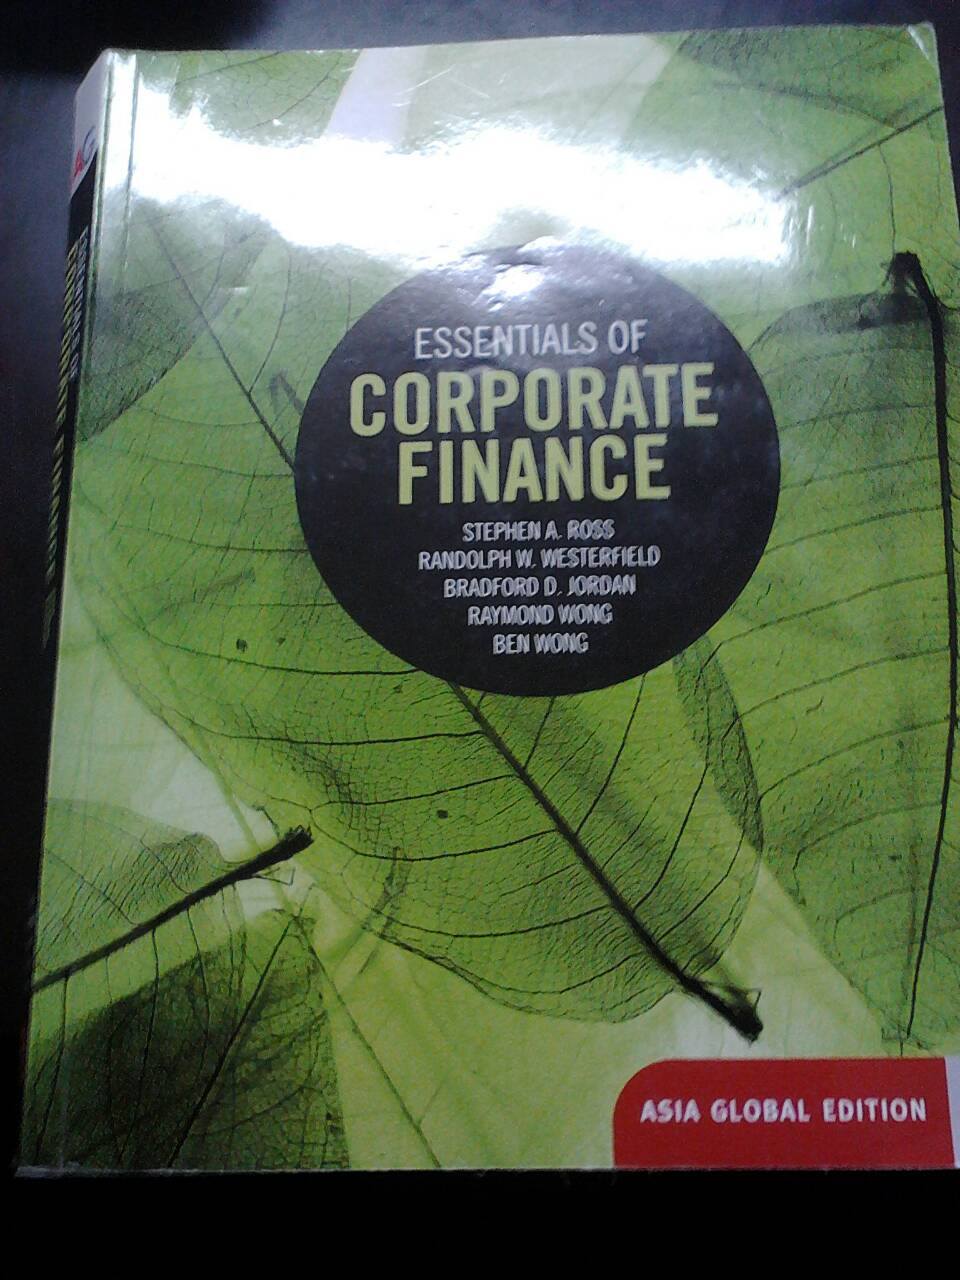 Essentials of Corporate Finance (Asia Global Edition) 詳細資料